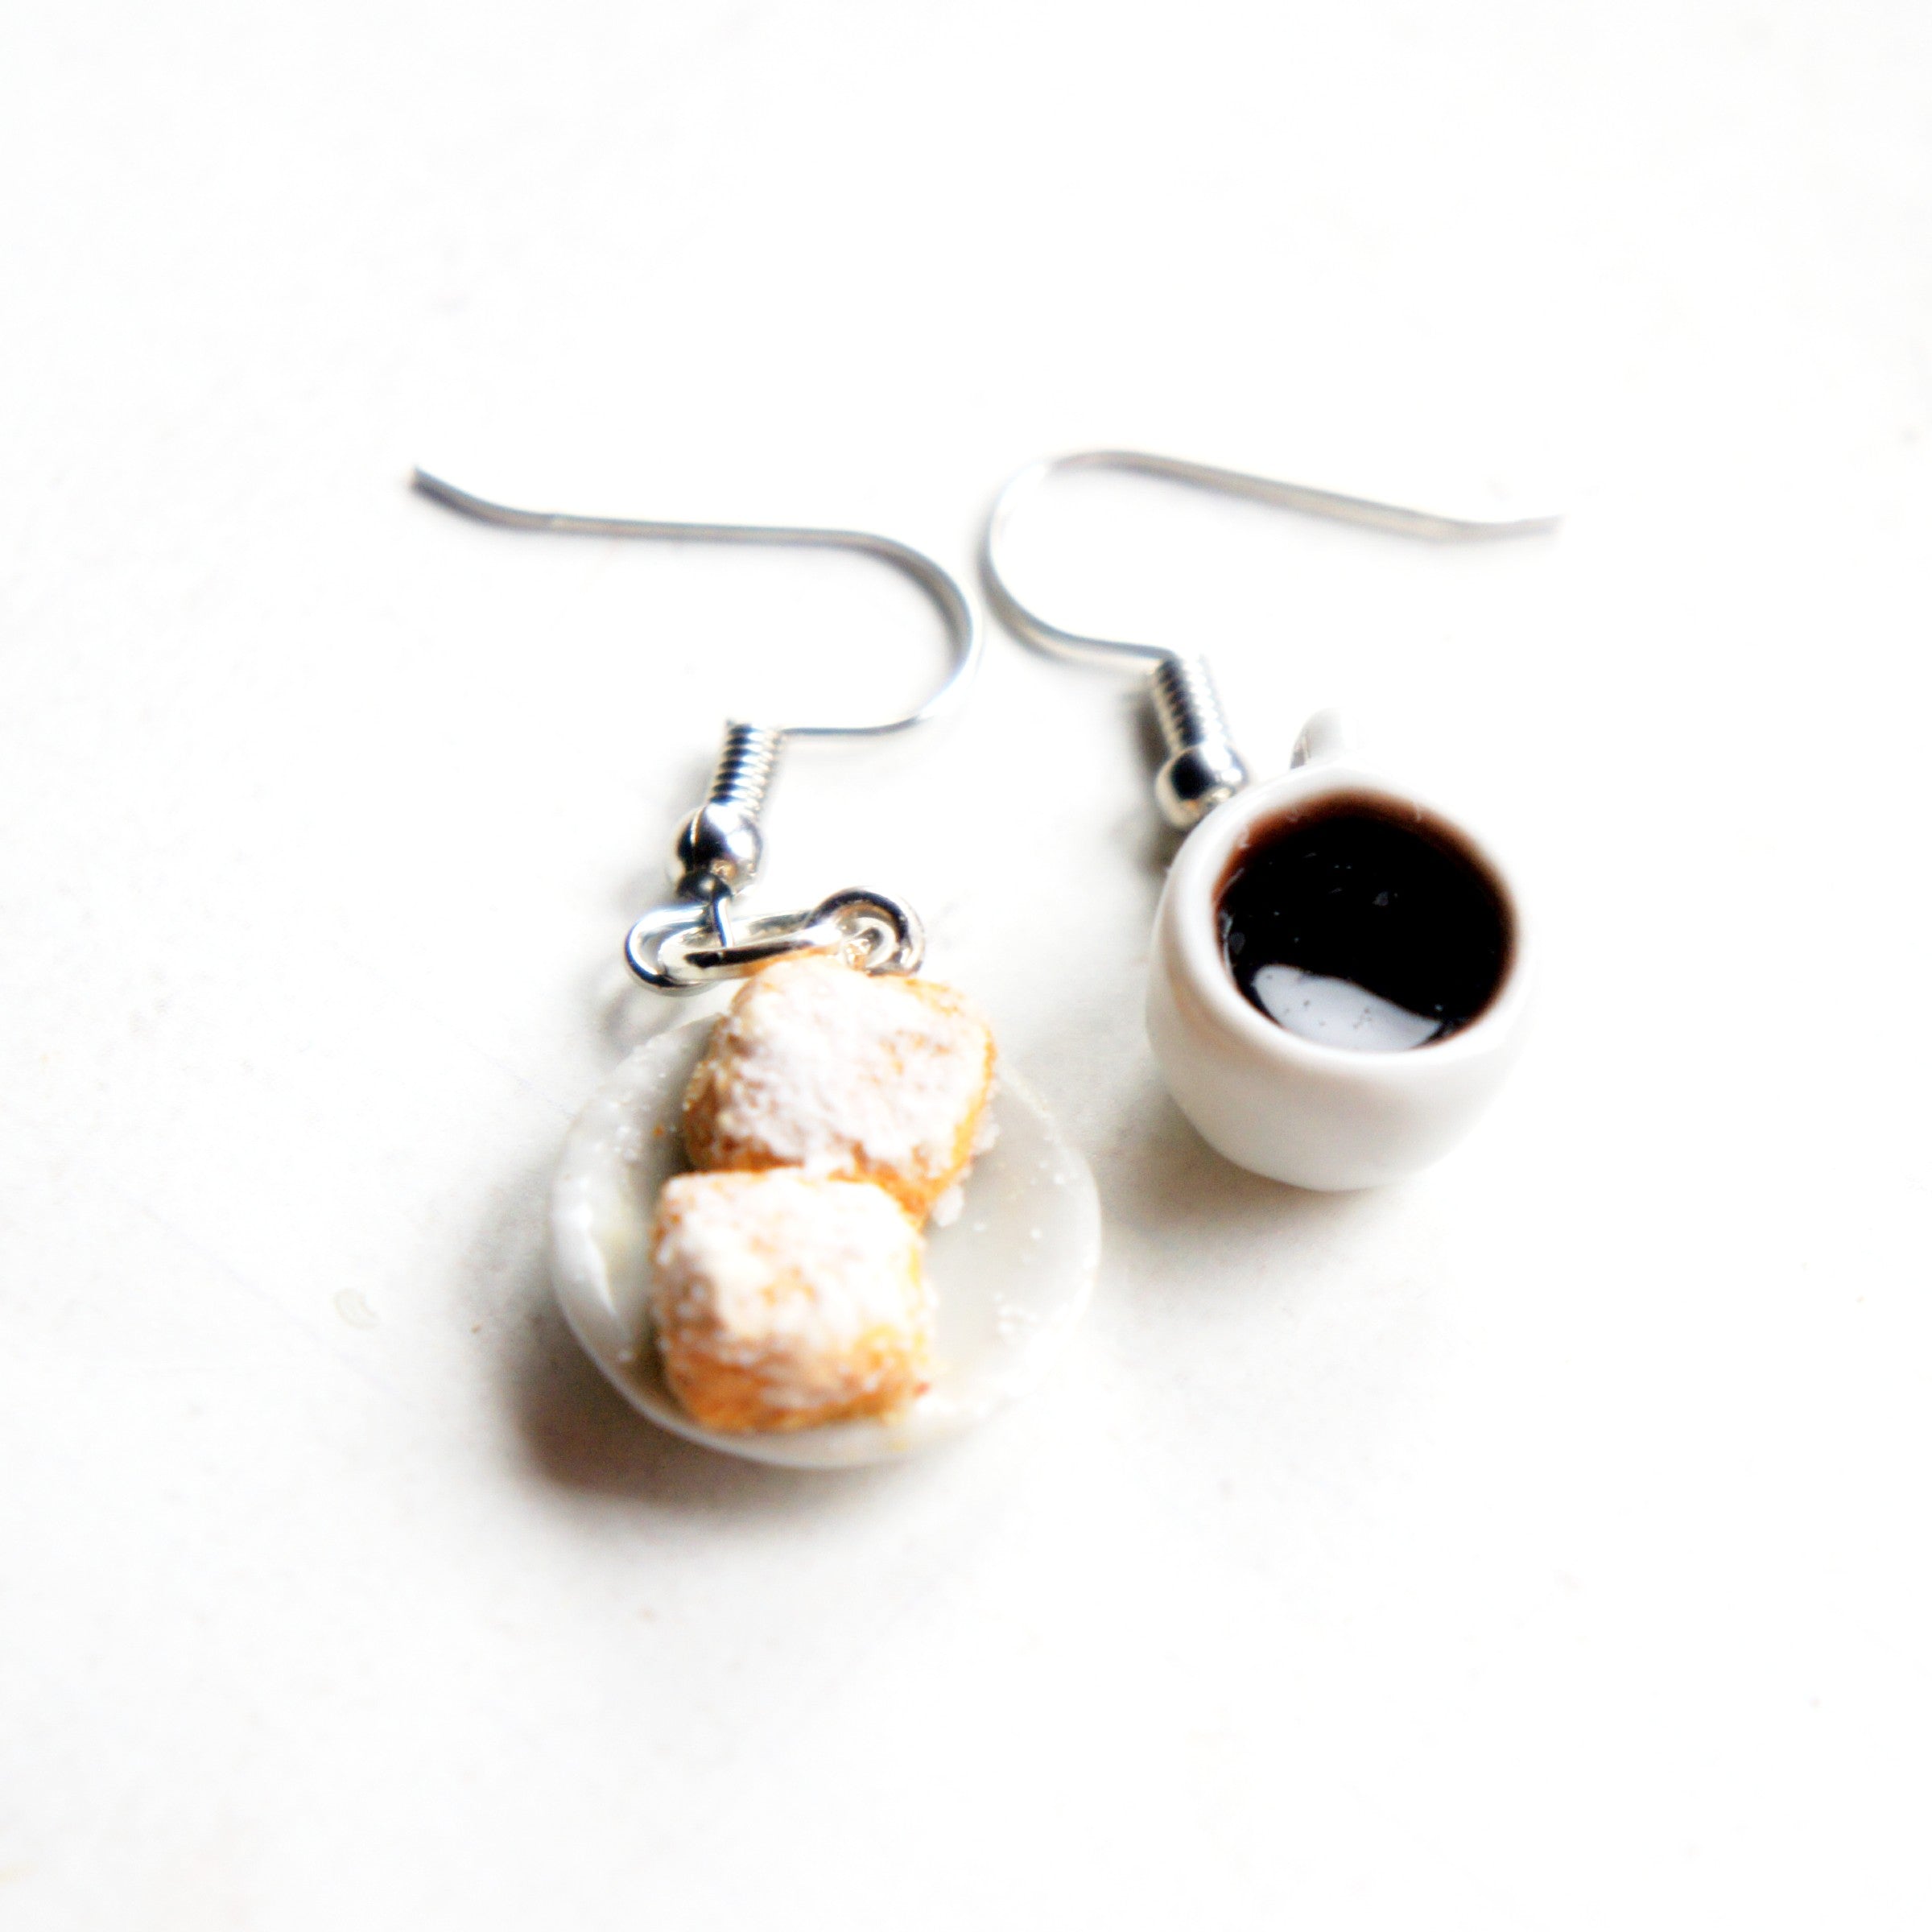 Beignets and Coffee Earrings - Jillicious charms and accessories